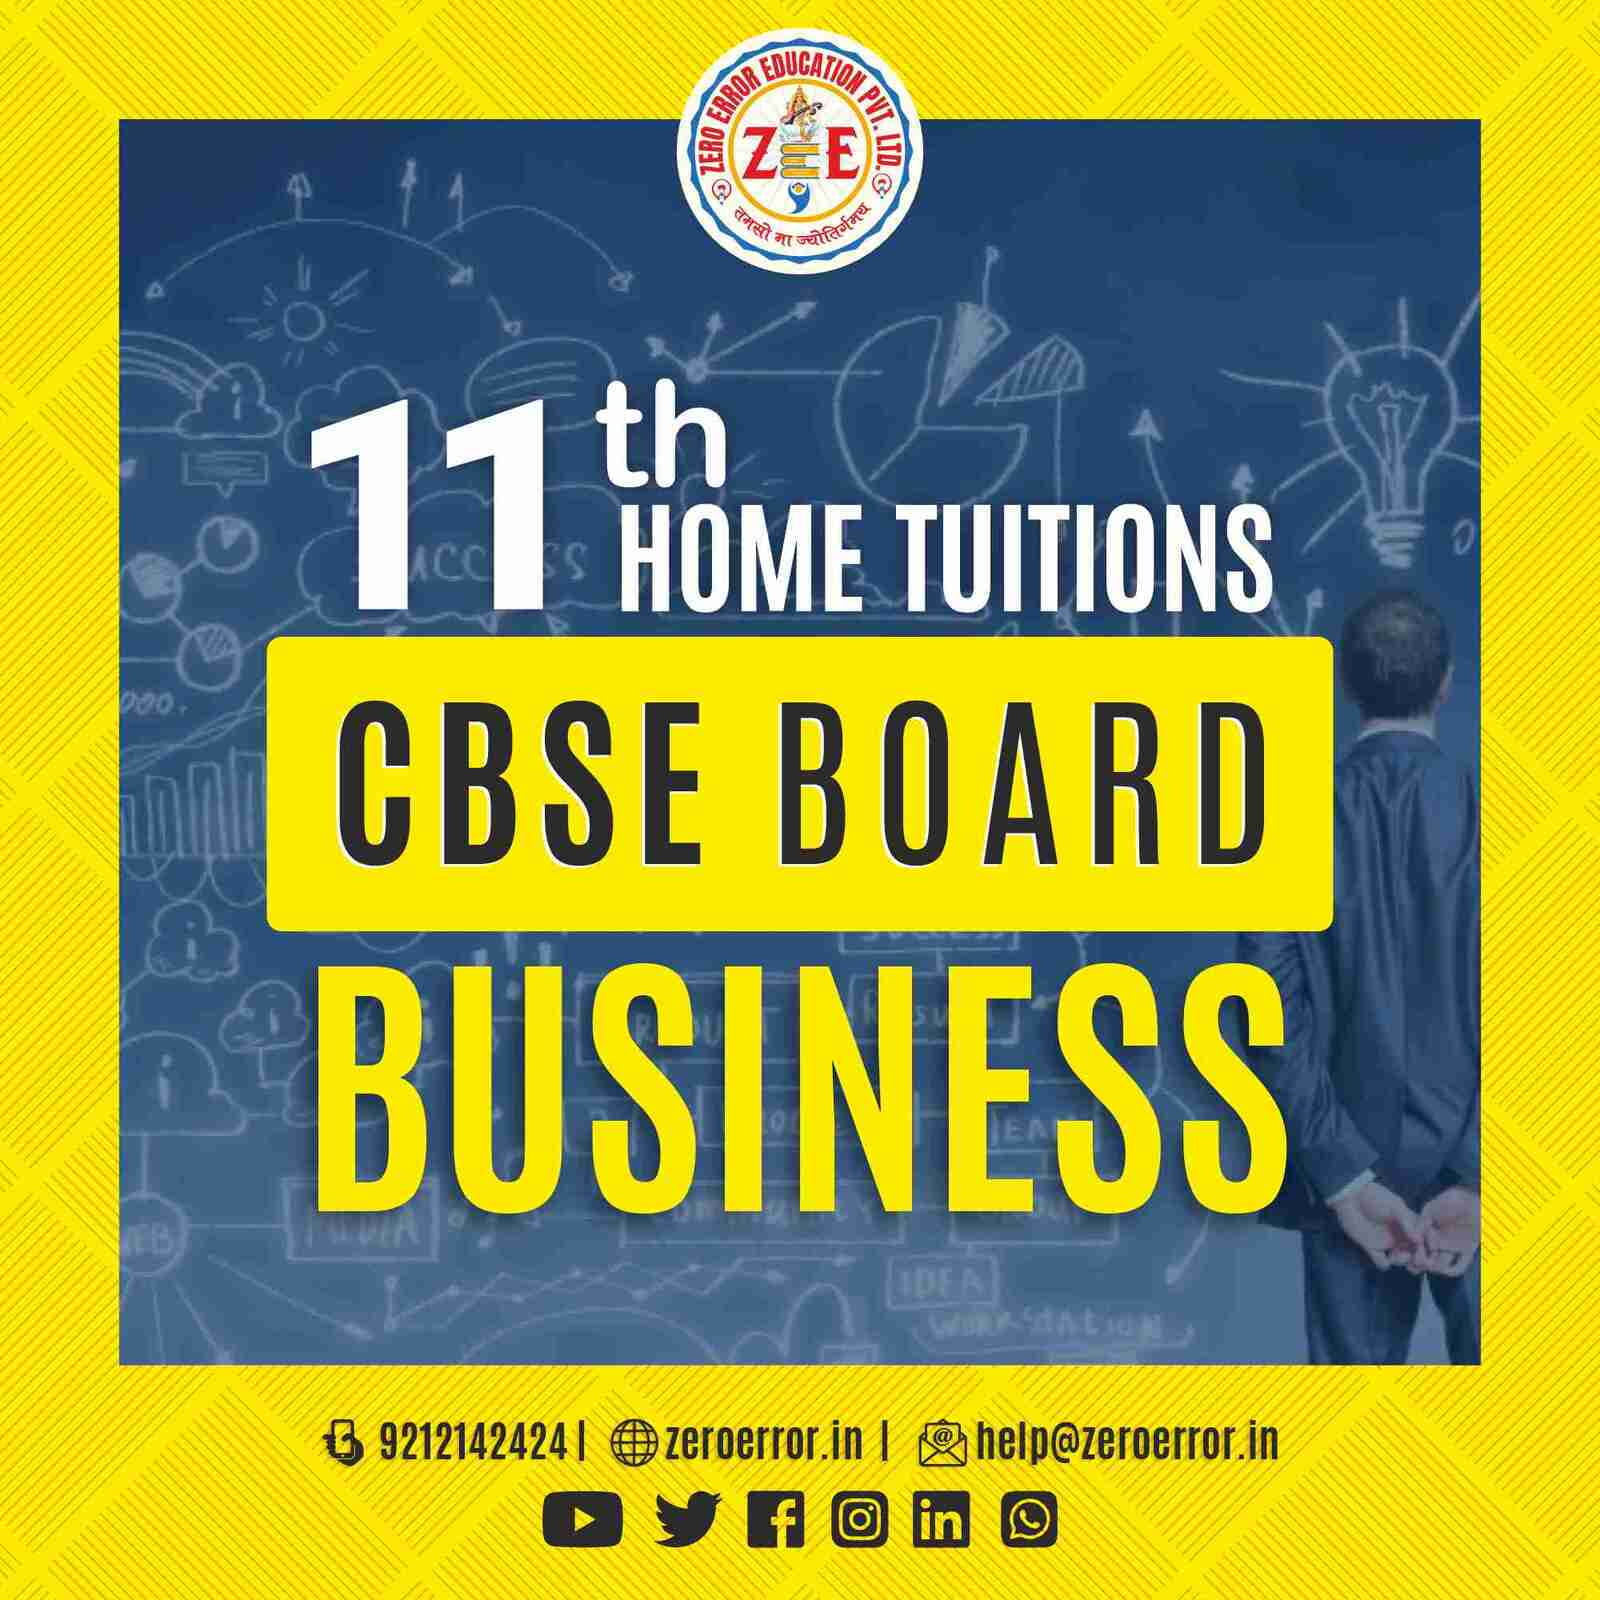 11th Grade CBSE Business Online Classes by Zero Error Education Prepare for your CBSE board exams with online and offline Business classes for 11th grade. Learn from experienced home tutors and get all the help you need to succeed. Enroll today at Zero Error Education. [https://zeroerror.in/] Call 9212142424 for more information.